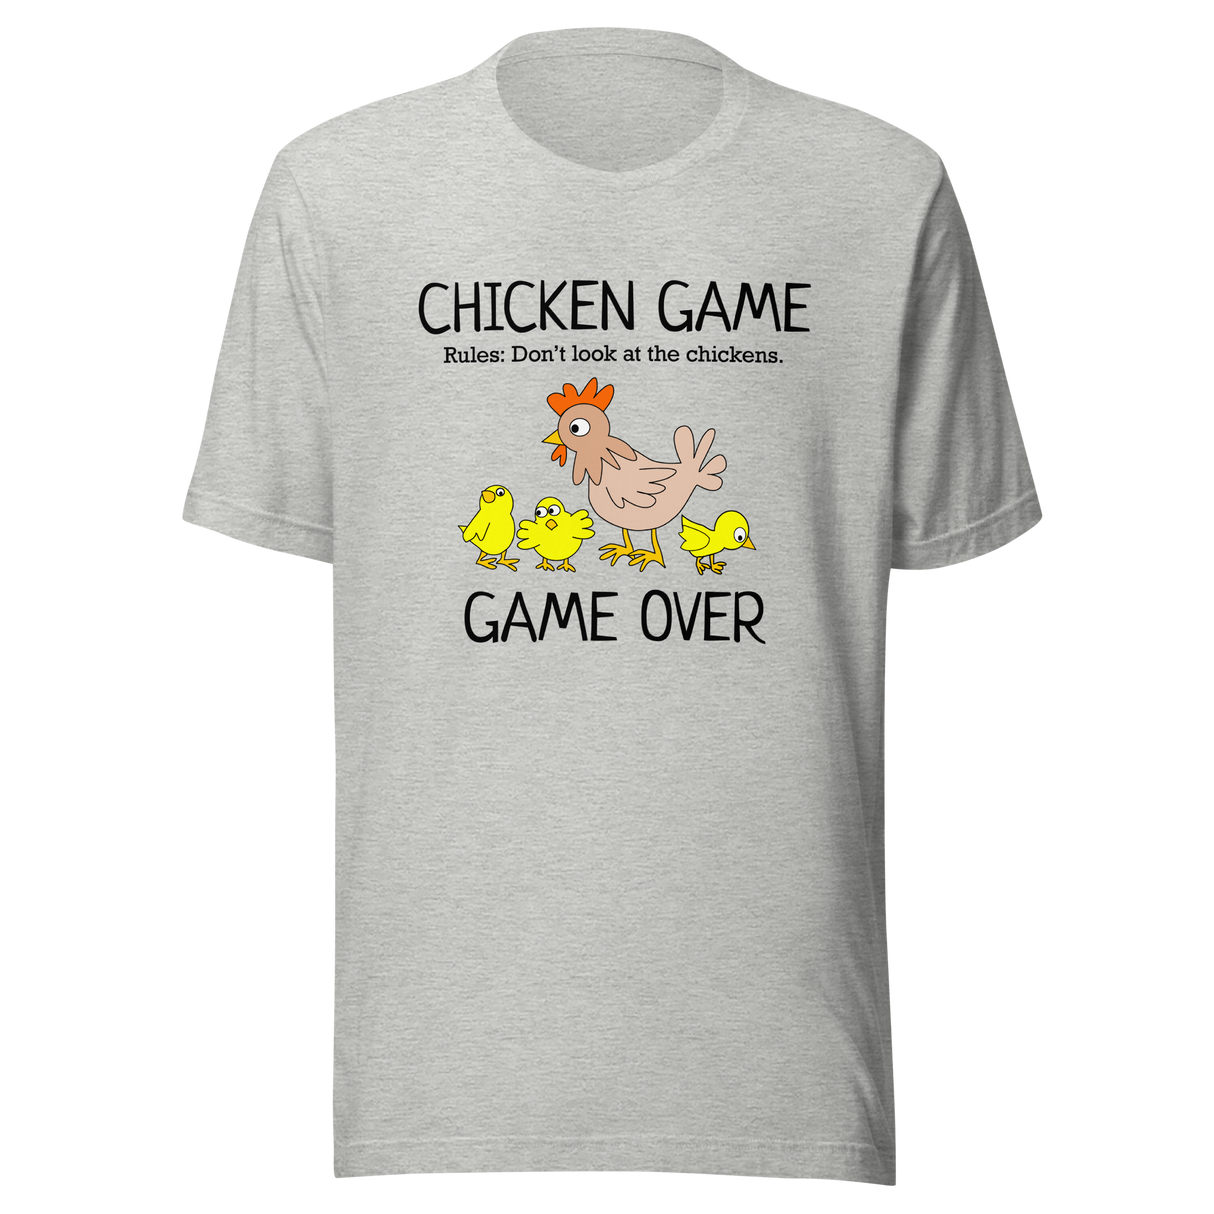 chicken-game-rules-dont-look-at-the-chickens-game-over-chicken-tee-game-t-shirt-look-tee-vote-t-shirt-election-tee#color_athletic-heather